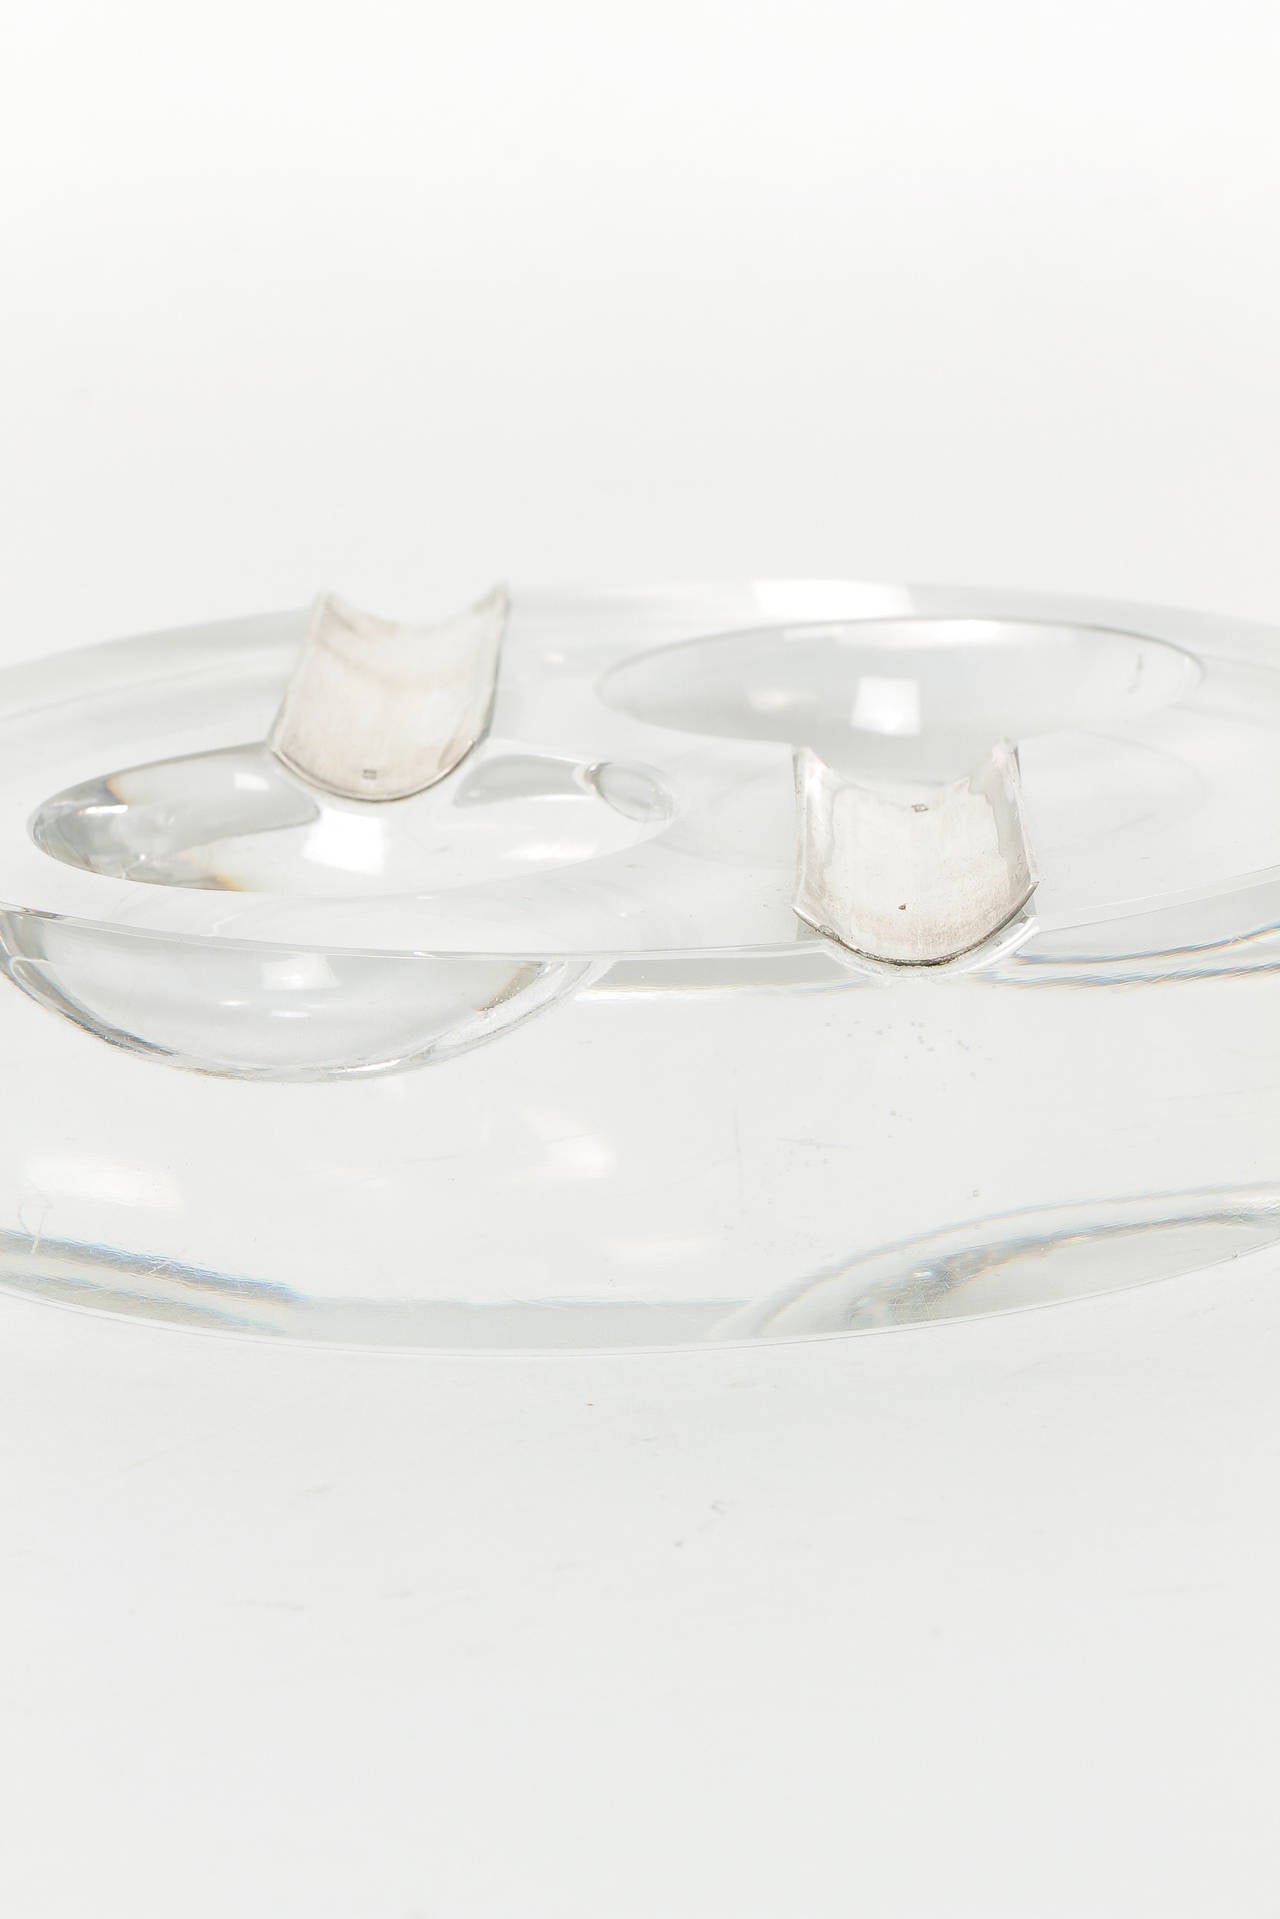 Cigar Ashtray by Hermann Bauer Crystal Glass and Silver, 1960s In Good Condition For Sale In Basel, CH